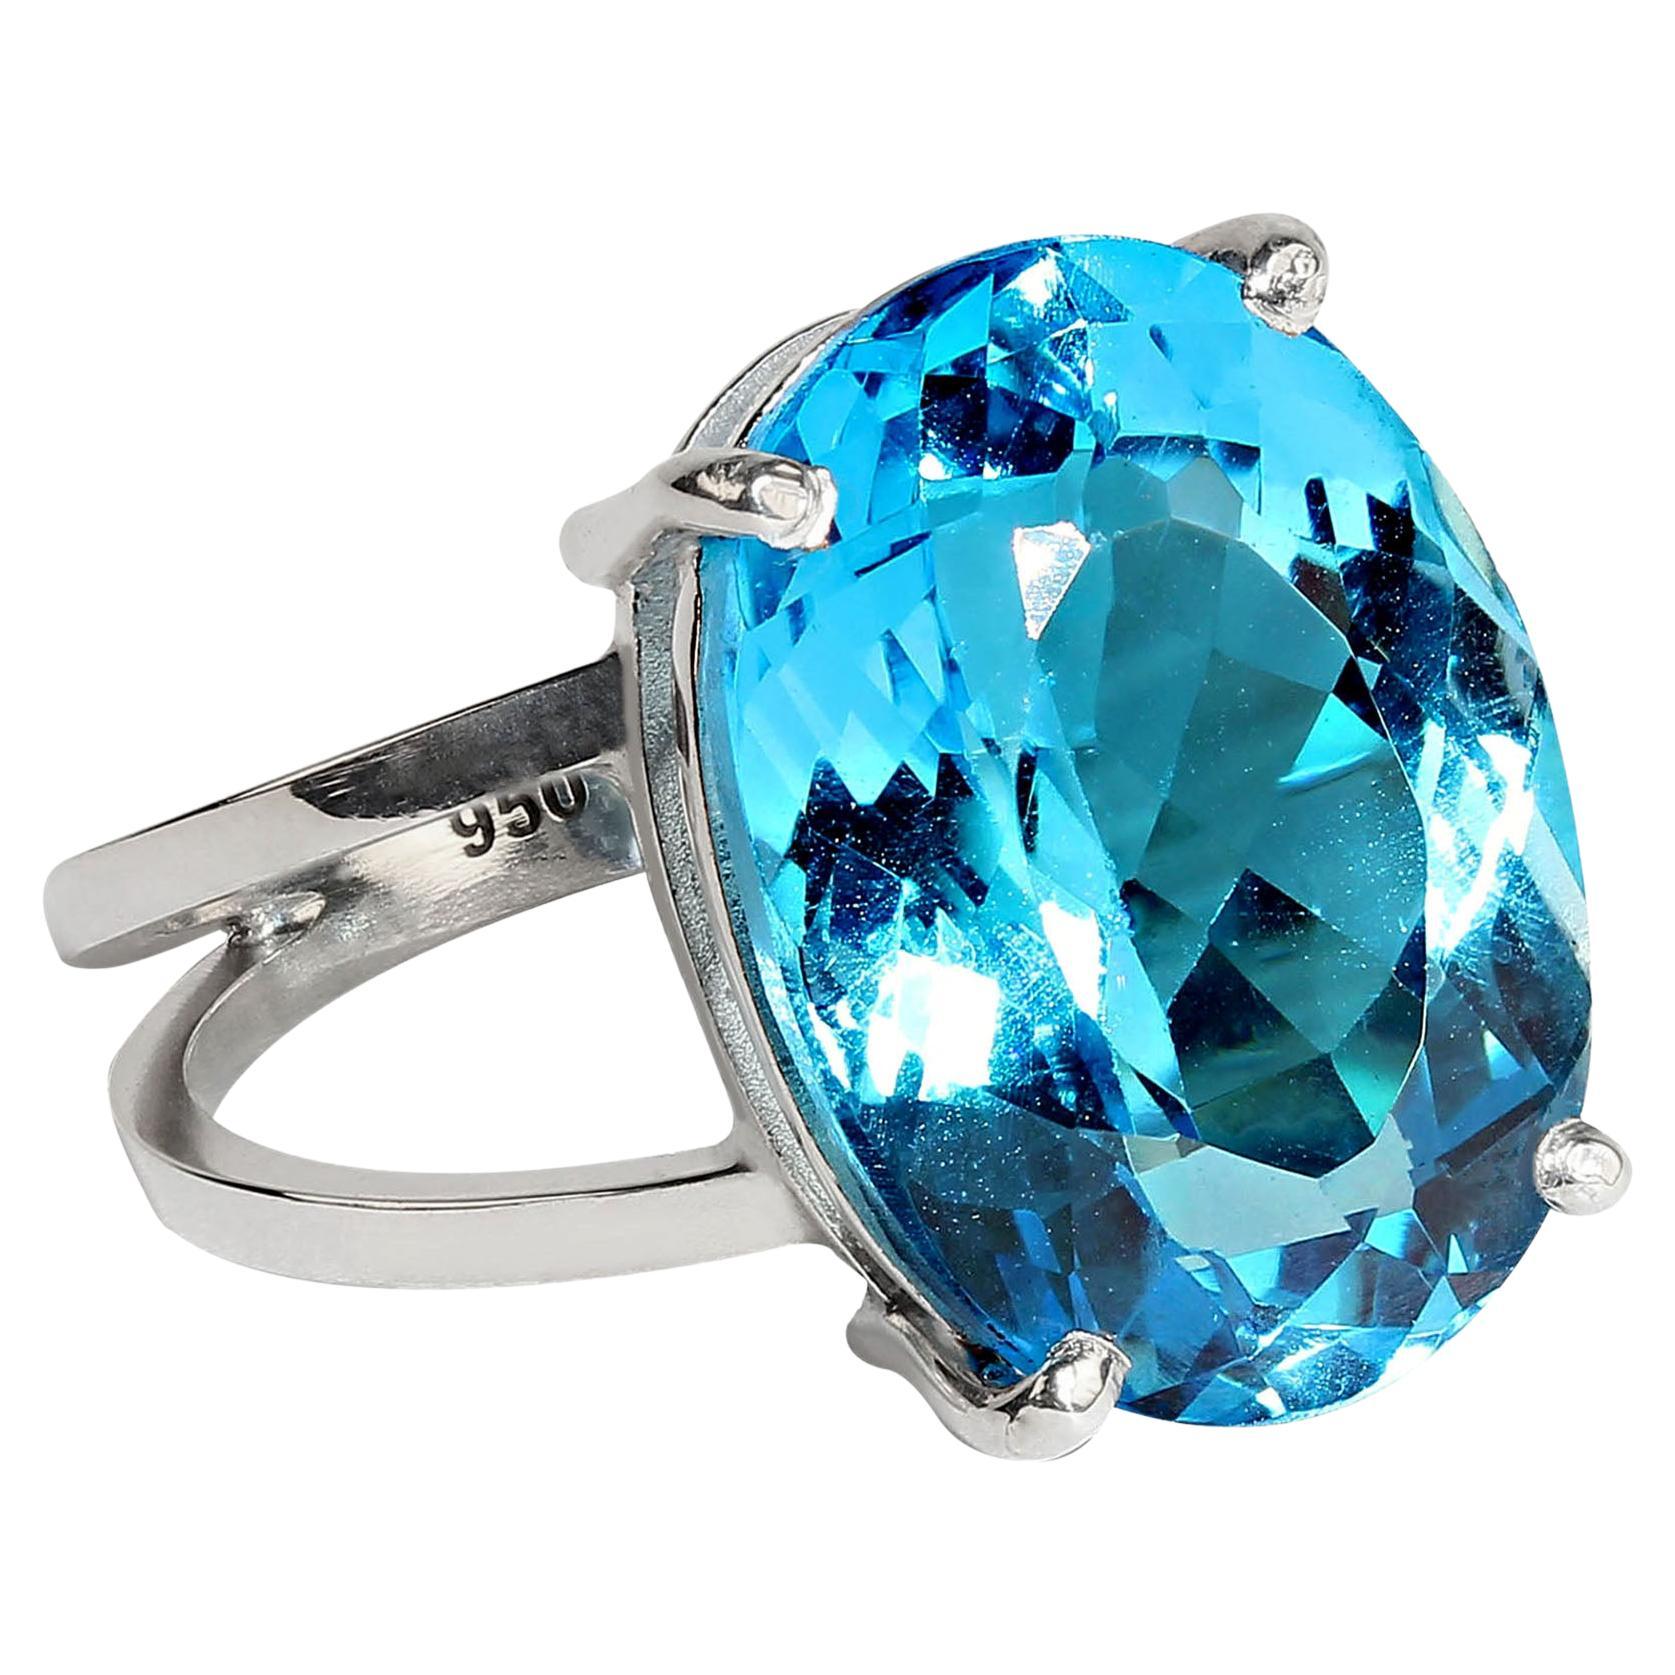 Sparkling Swiss Blue Topaz and handmade Sterling Silver ring.  This gorgeous ring comes from our favorite vendor in Belo Horizonte, Minas Gerais, Brazil. The 17.22CT Swiss Blue Topaz os 18 X 13 MM. The classic basket setting is handmade in 3.95grns